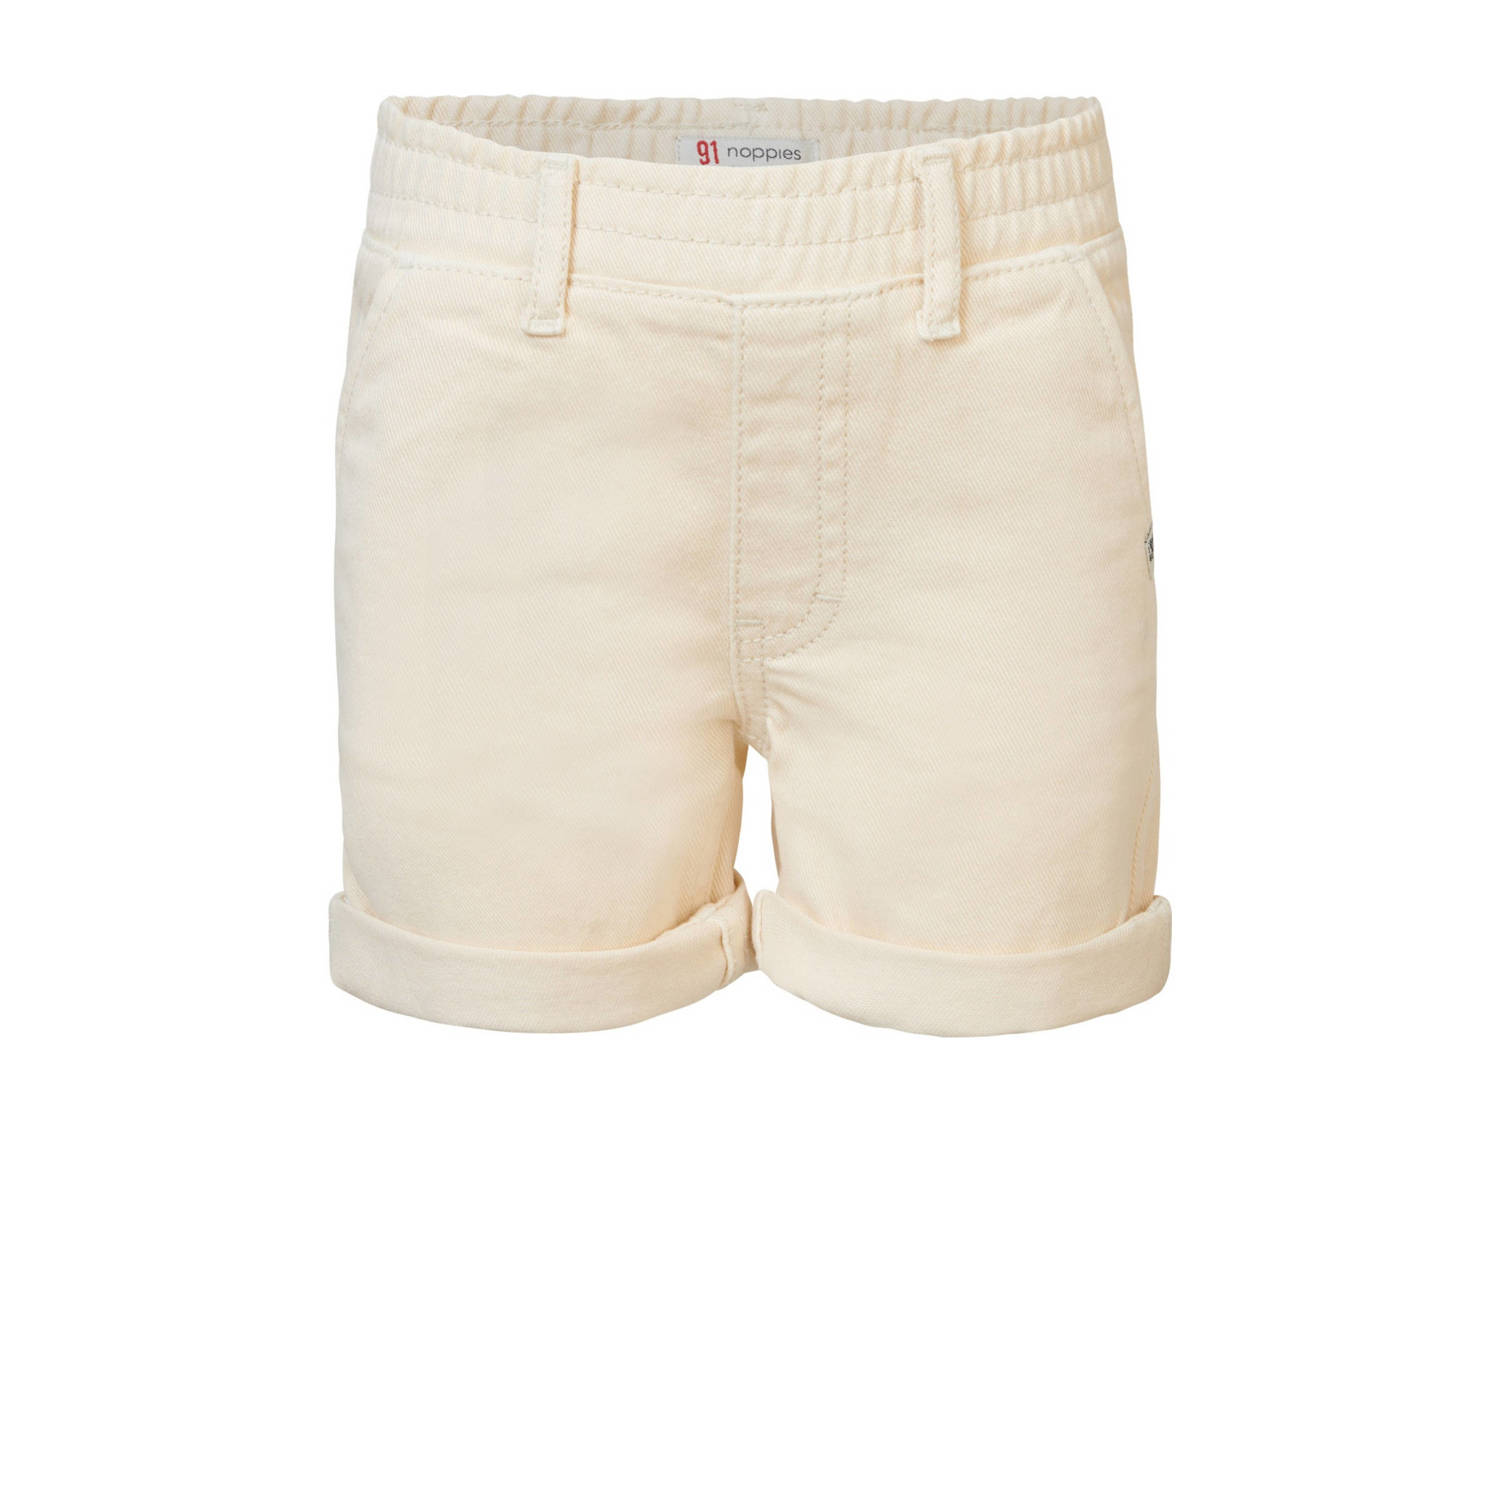 Noppies casual short Denison offwhite